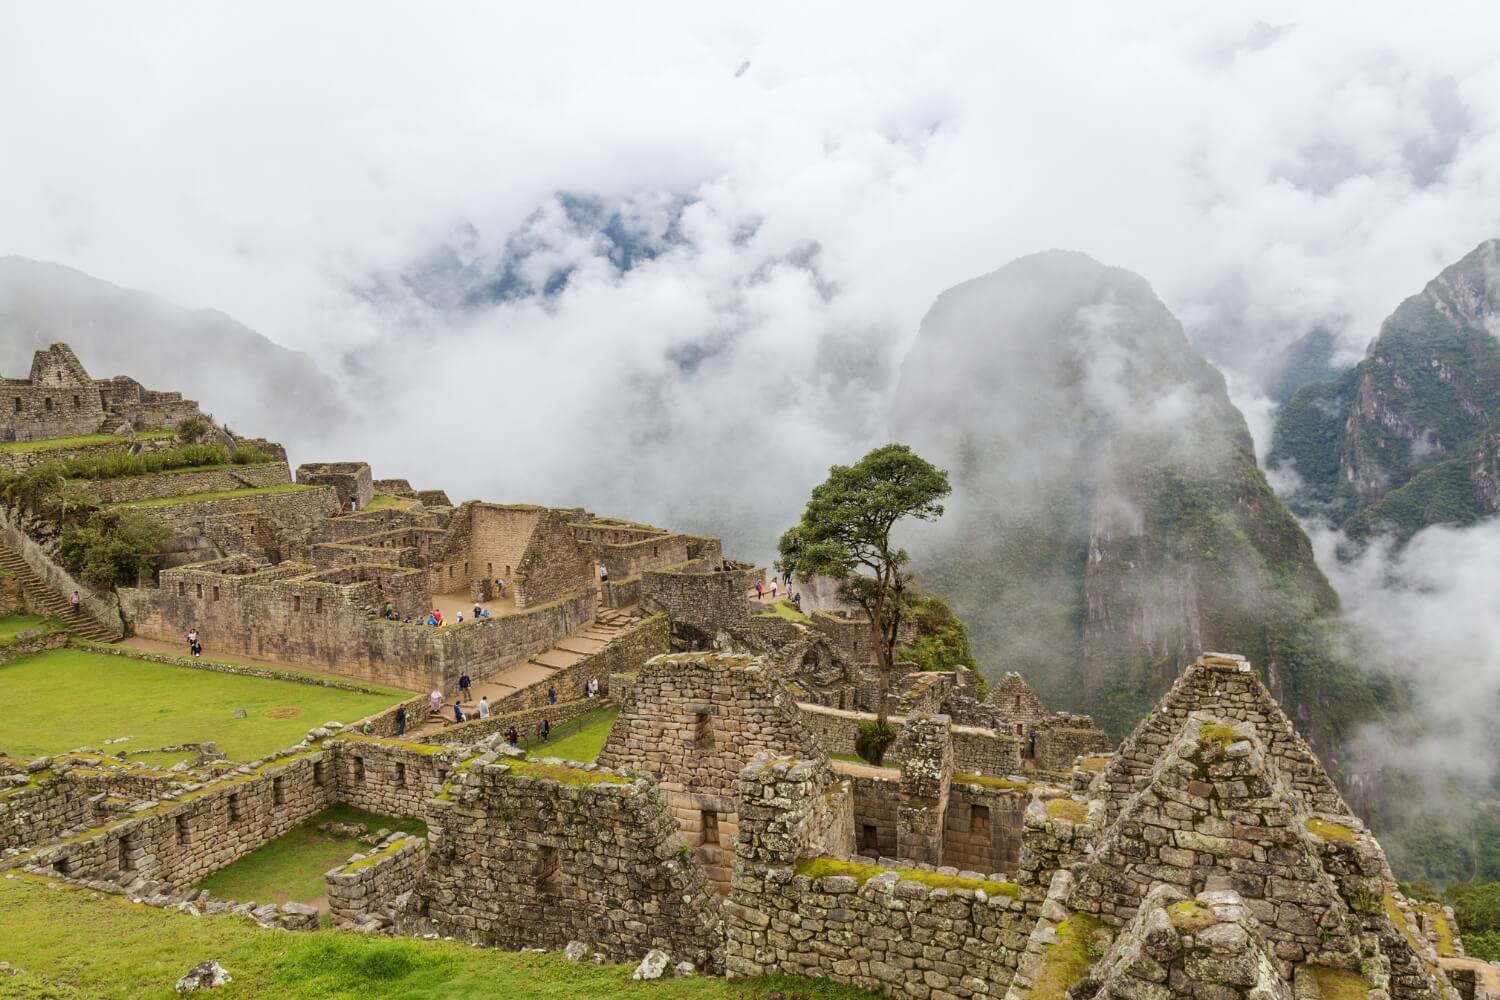 WHAT IS THE BEST SEASON TO VISIT THE CITADEL OF MACHU PICCHU?